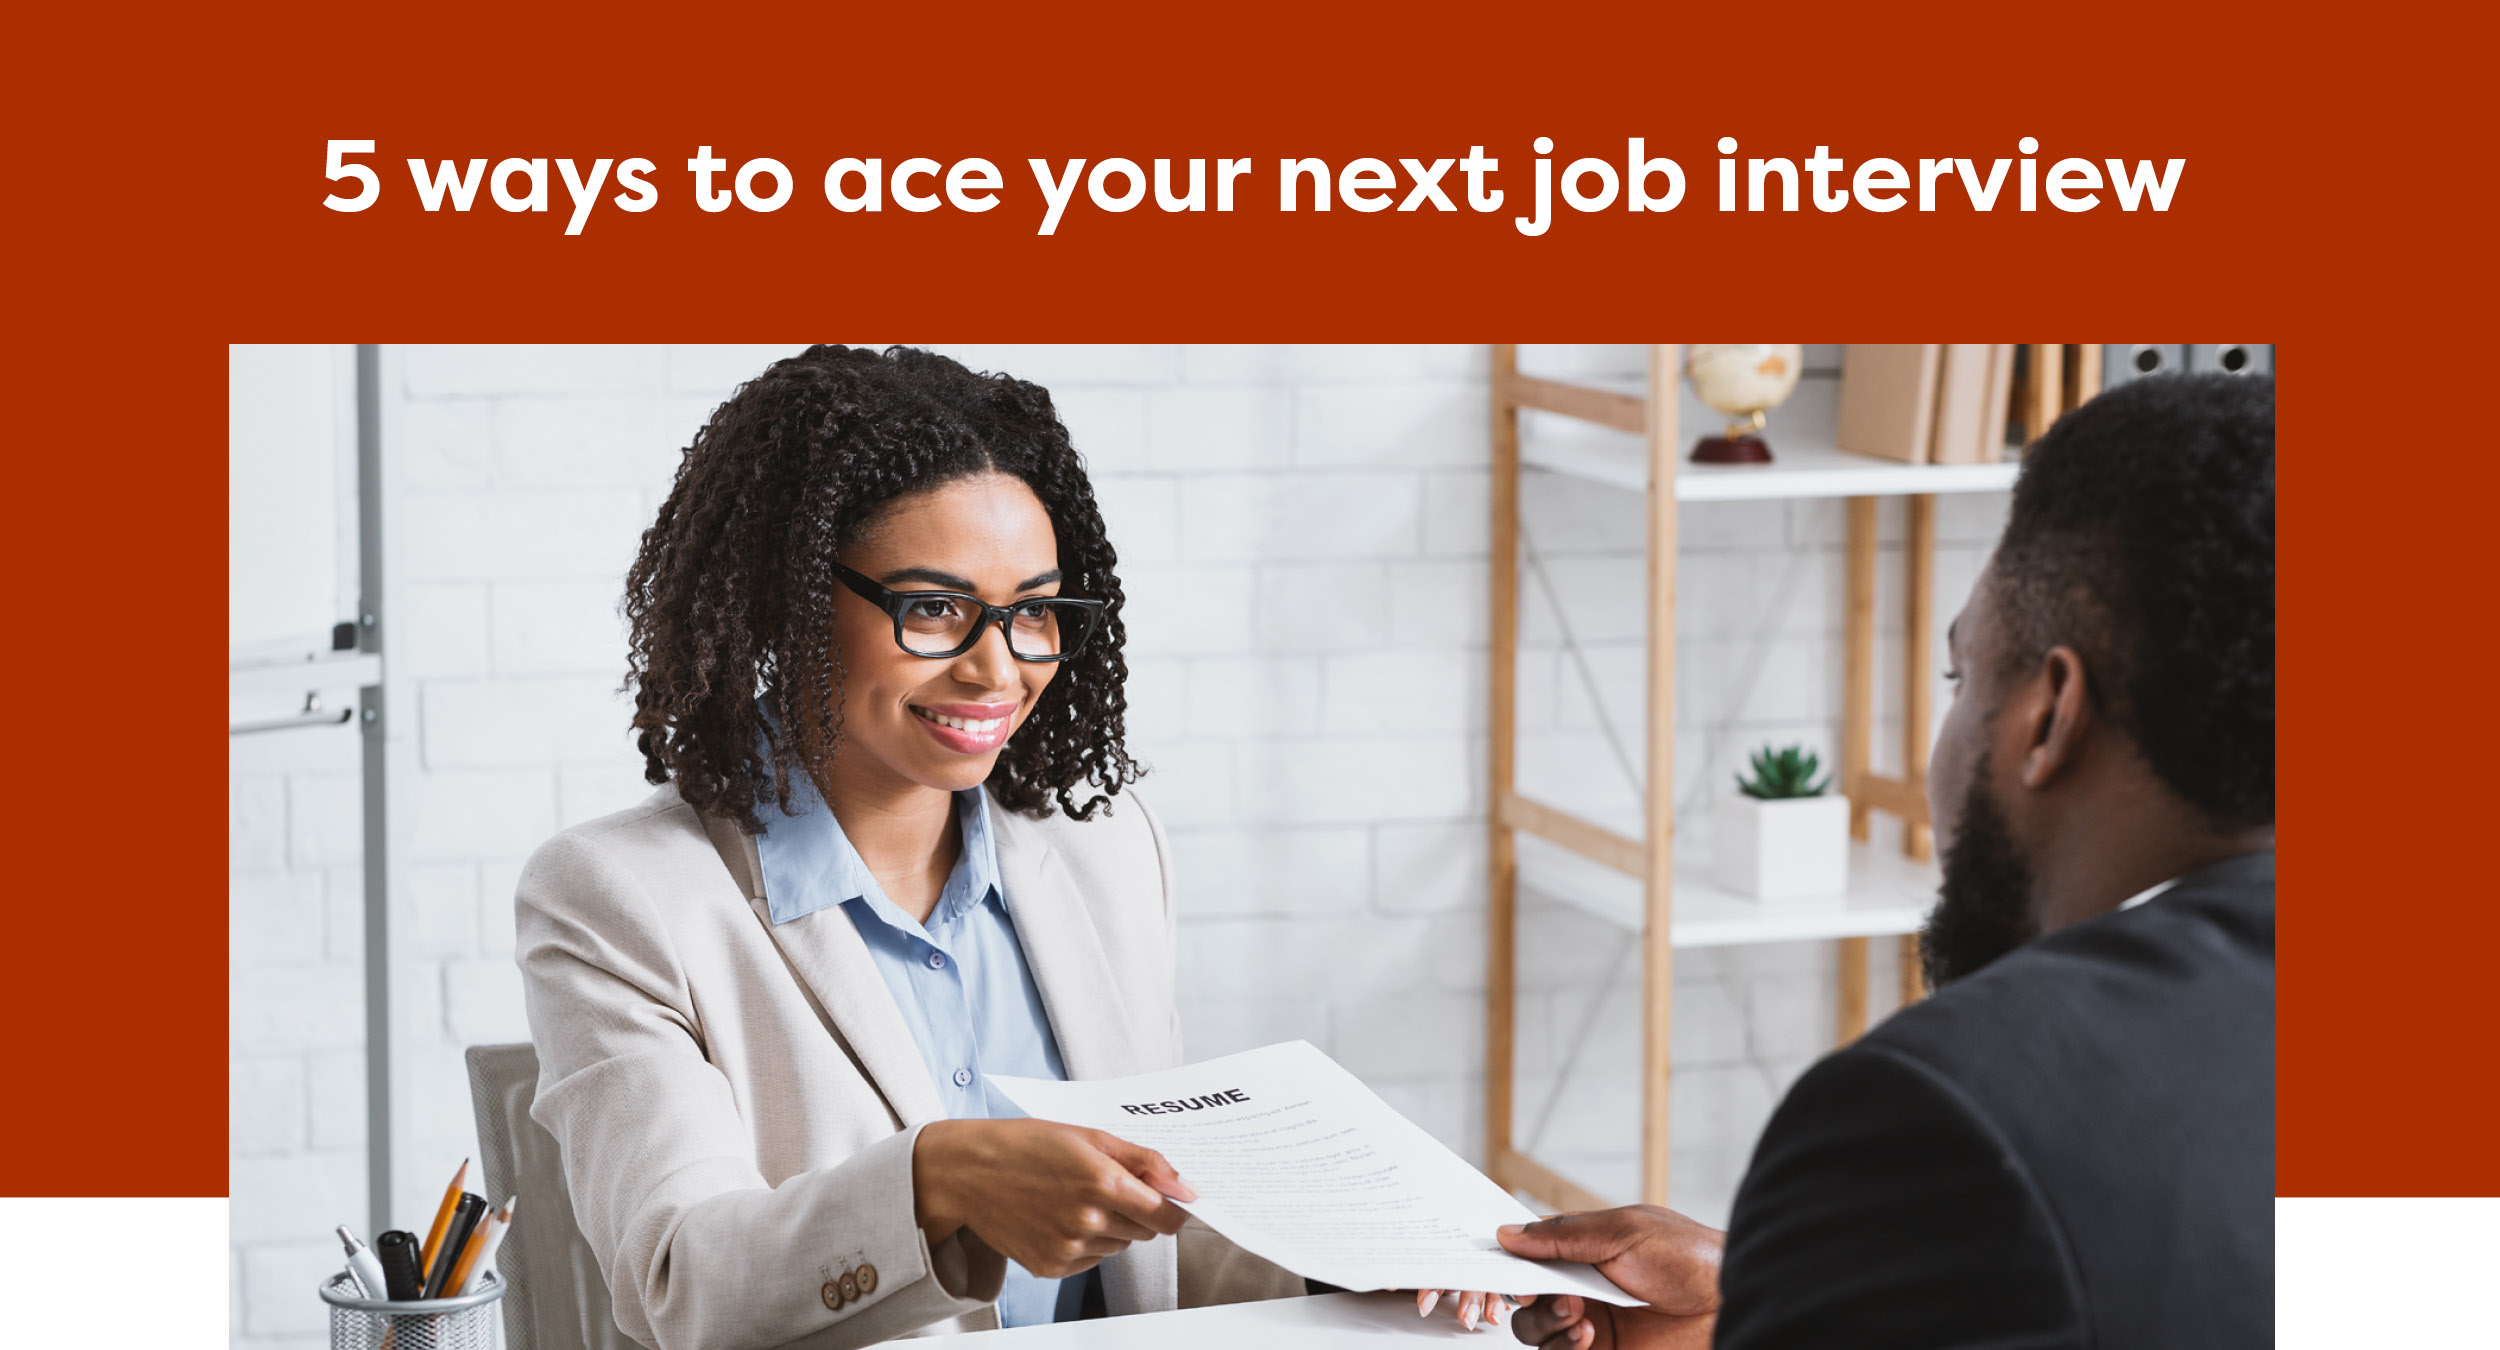 5 ways to ace your next job interview